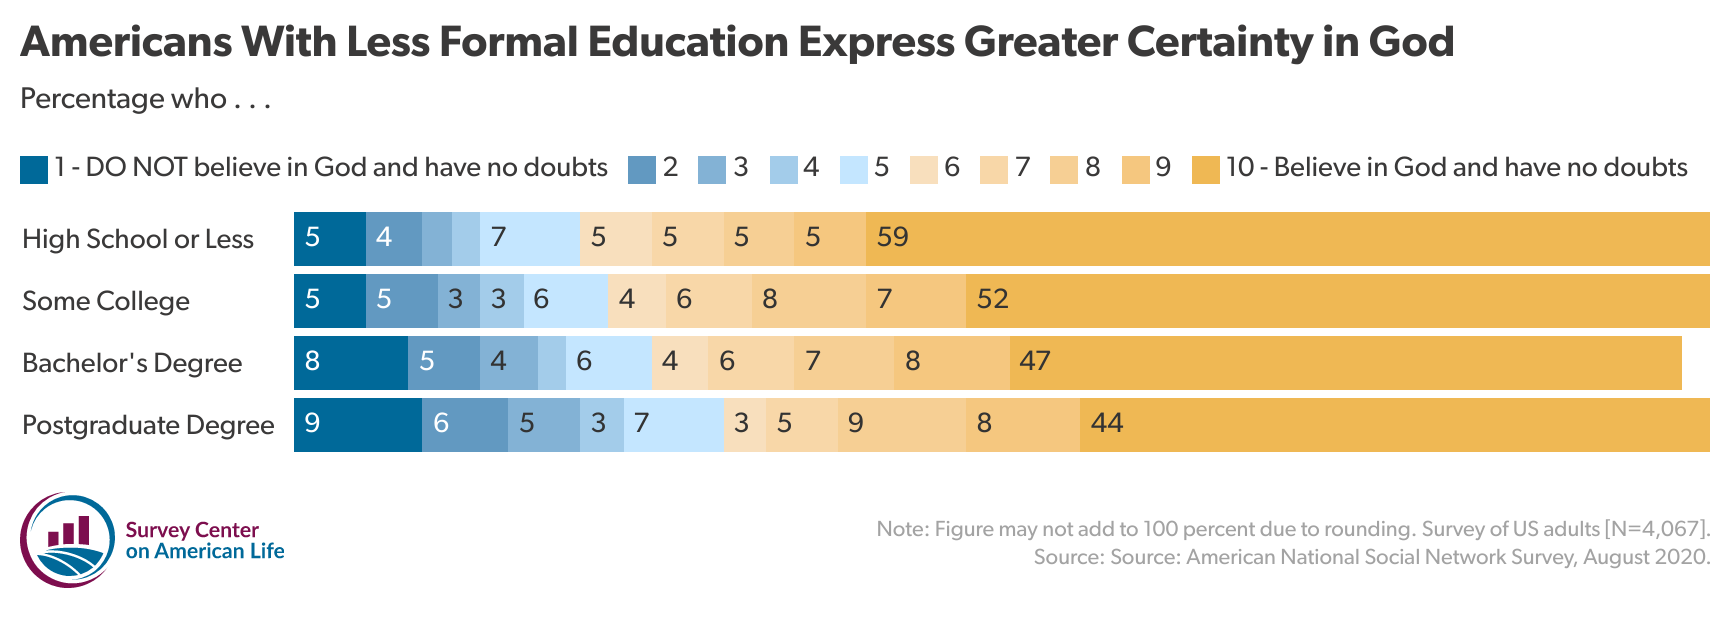 Chart showing Americans with less formal education express greater certainty in God.